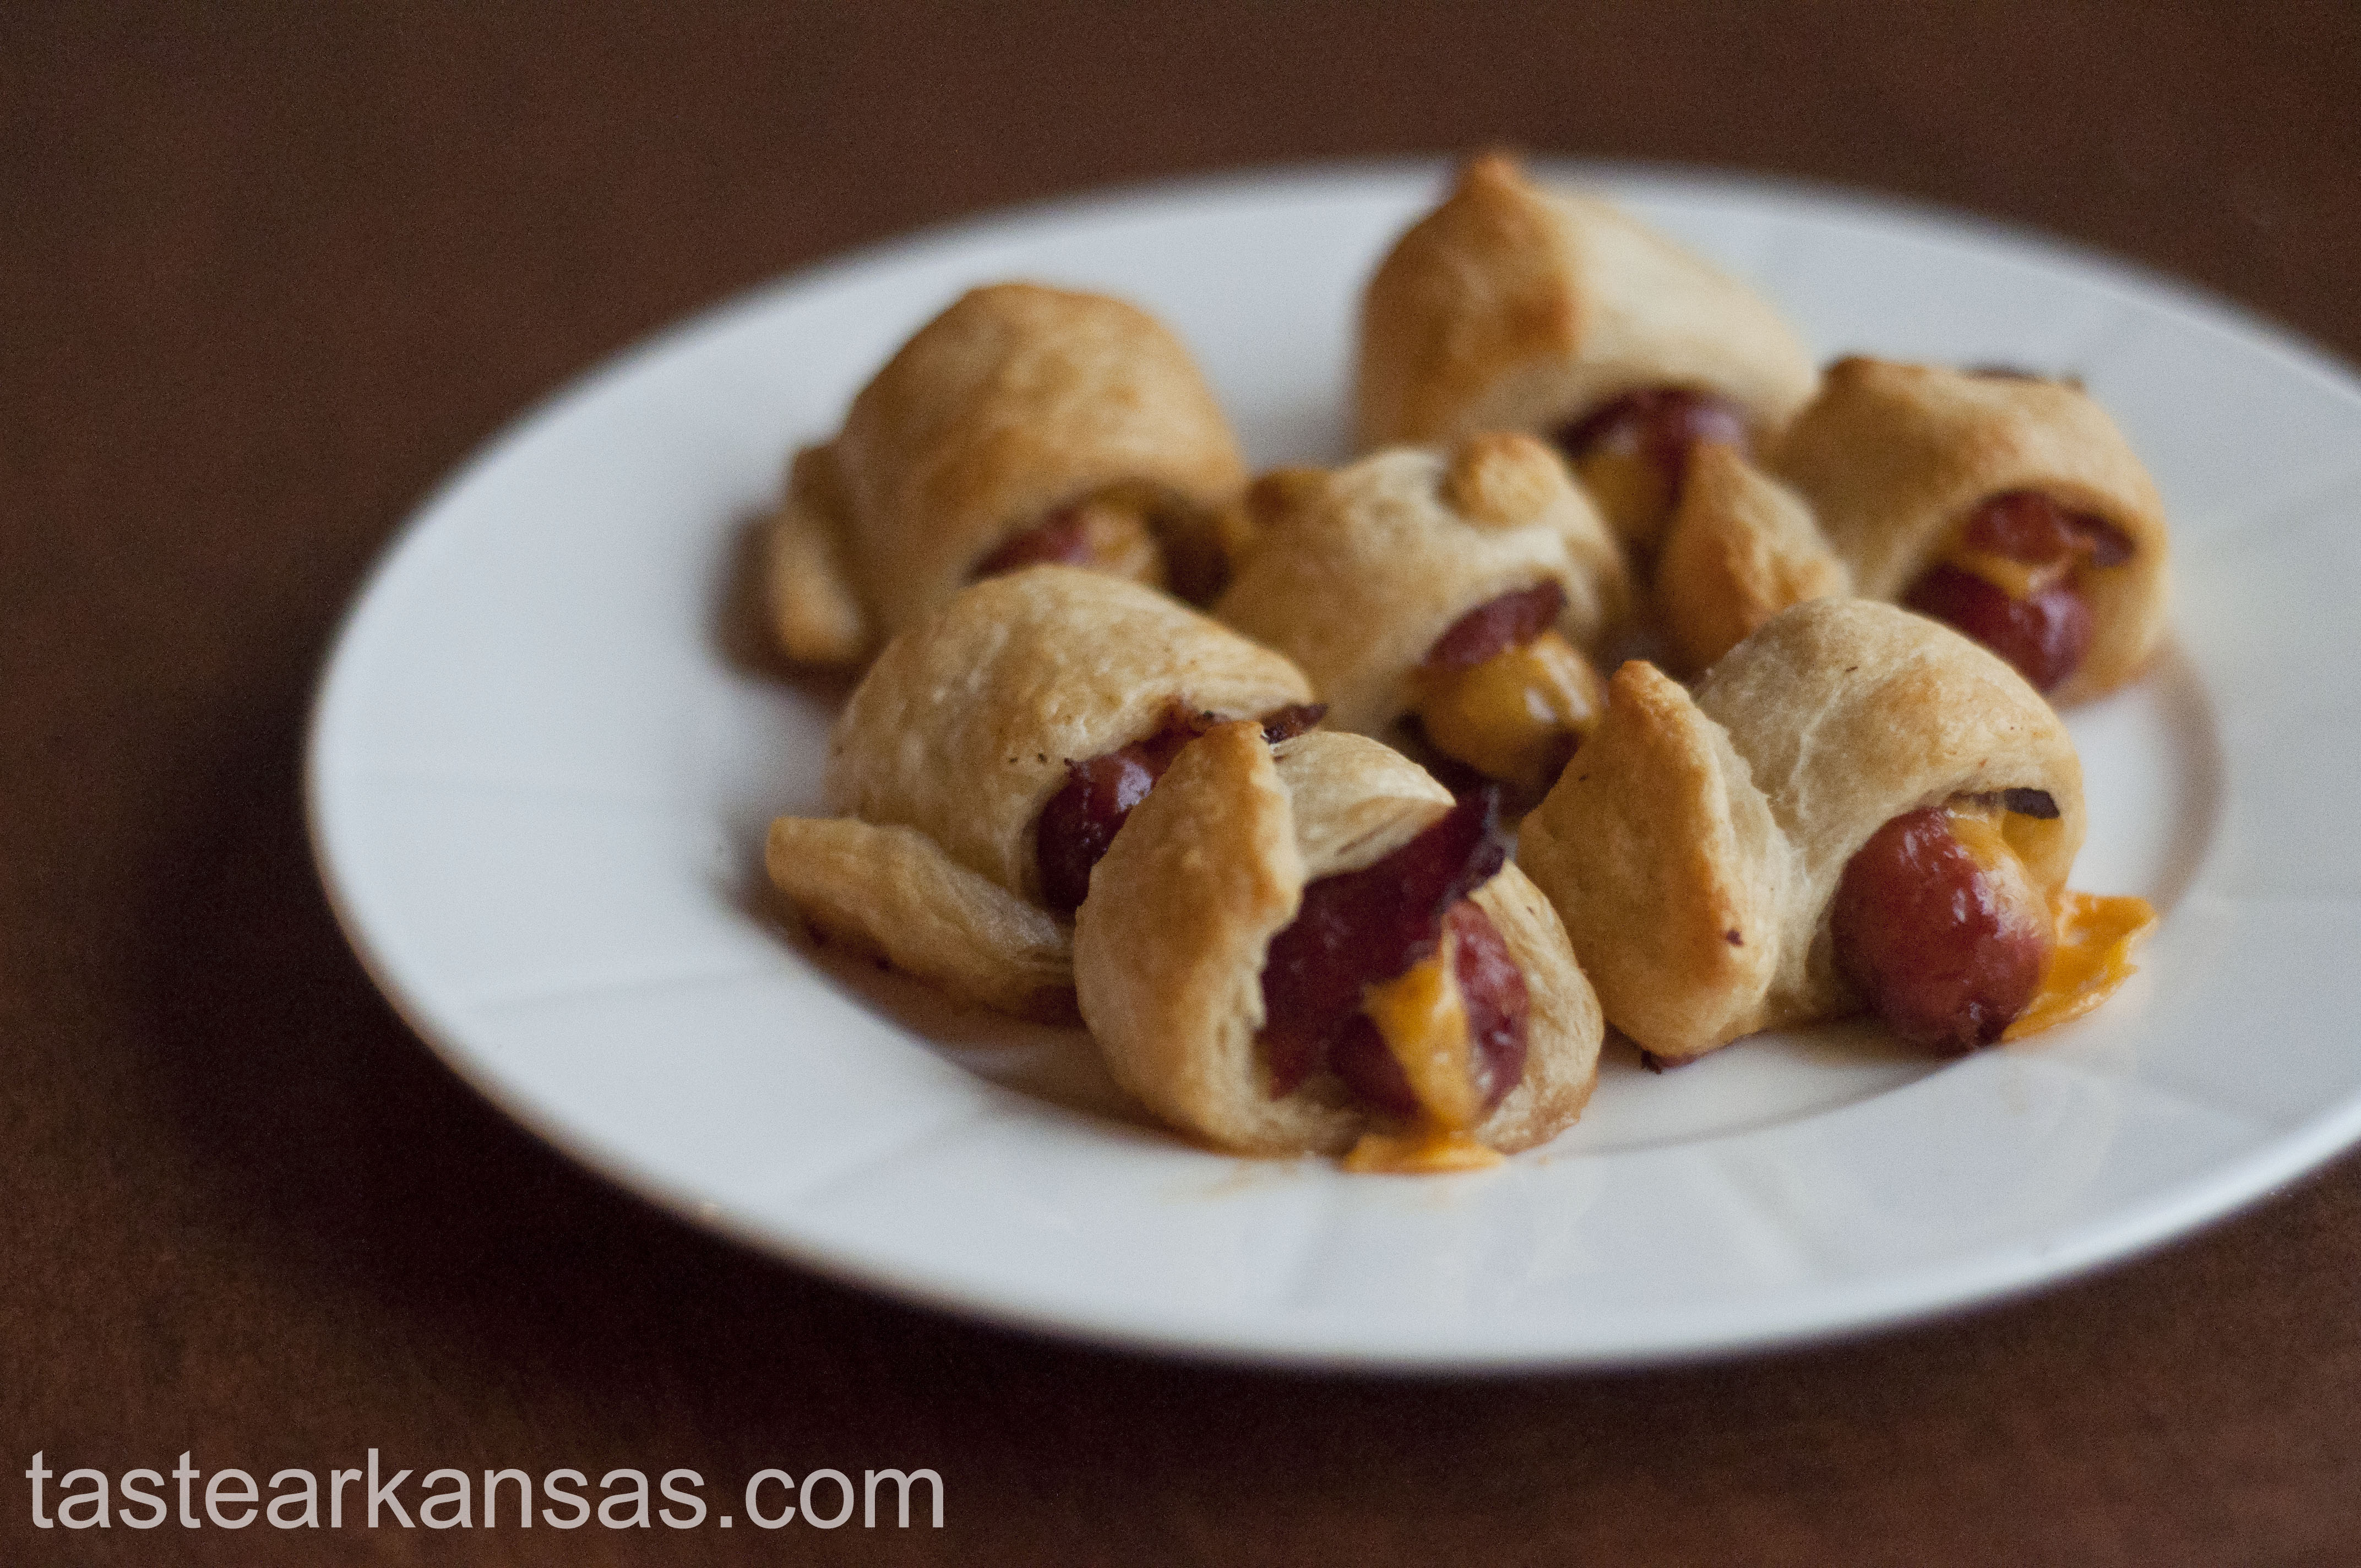 Bacon & Cheddar Pigs in a Blanket